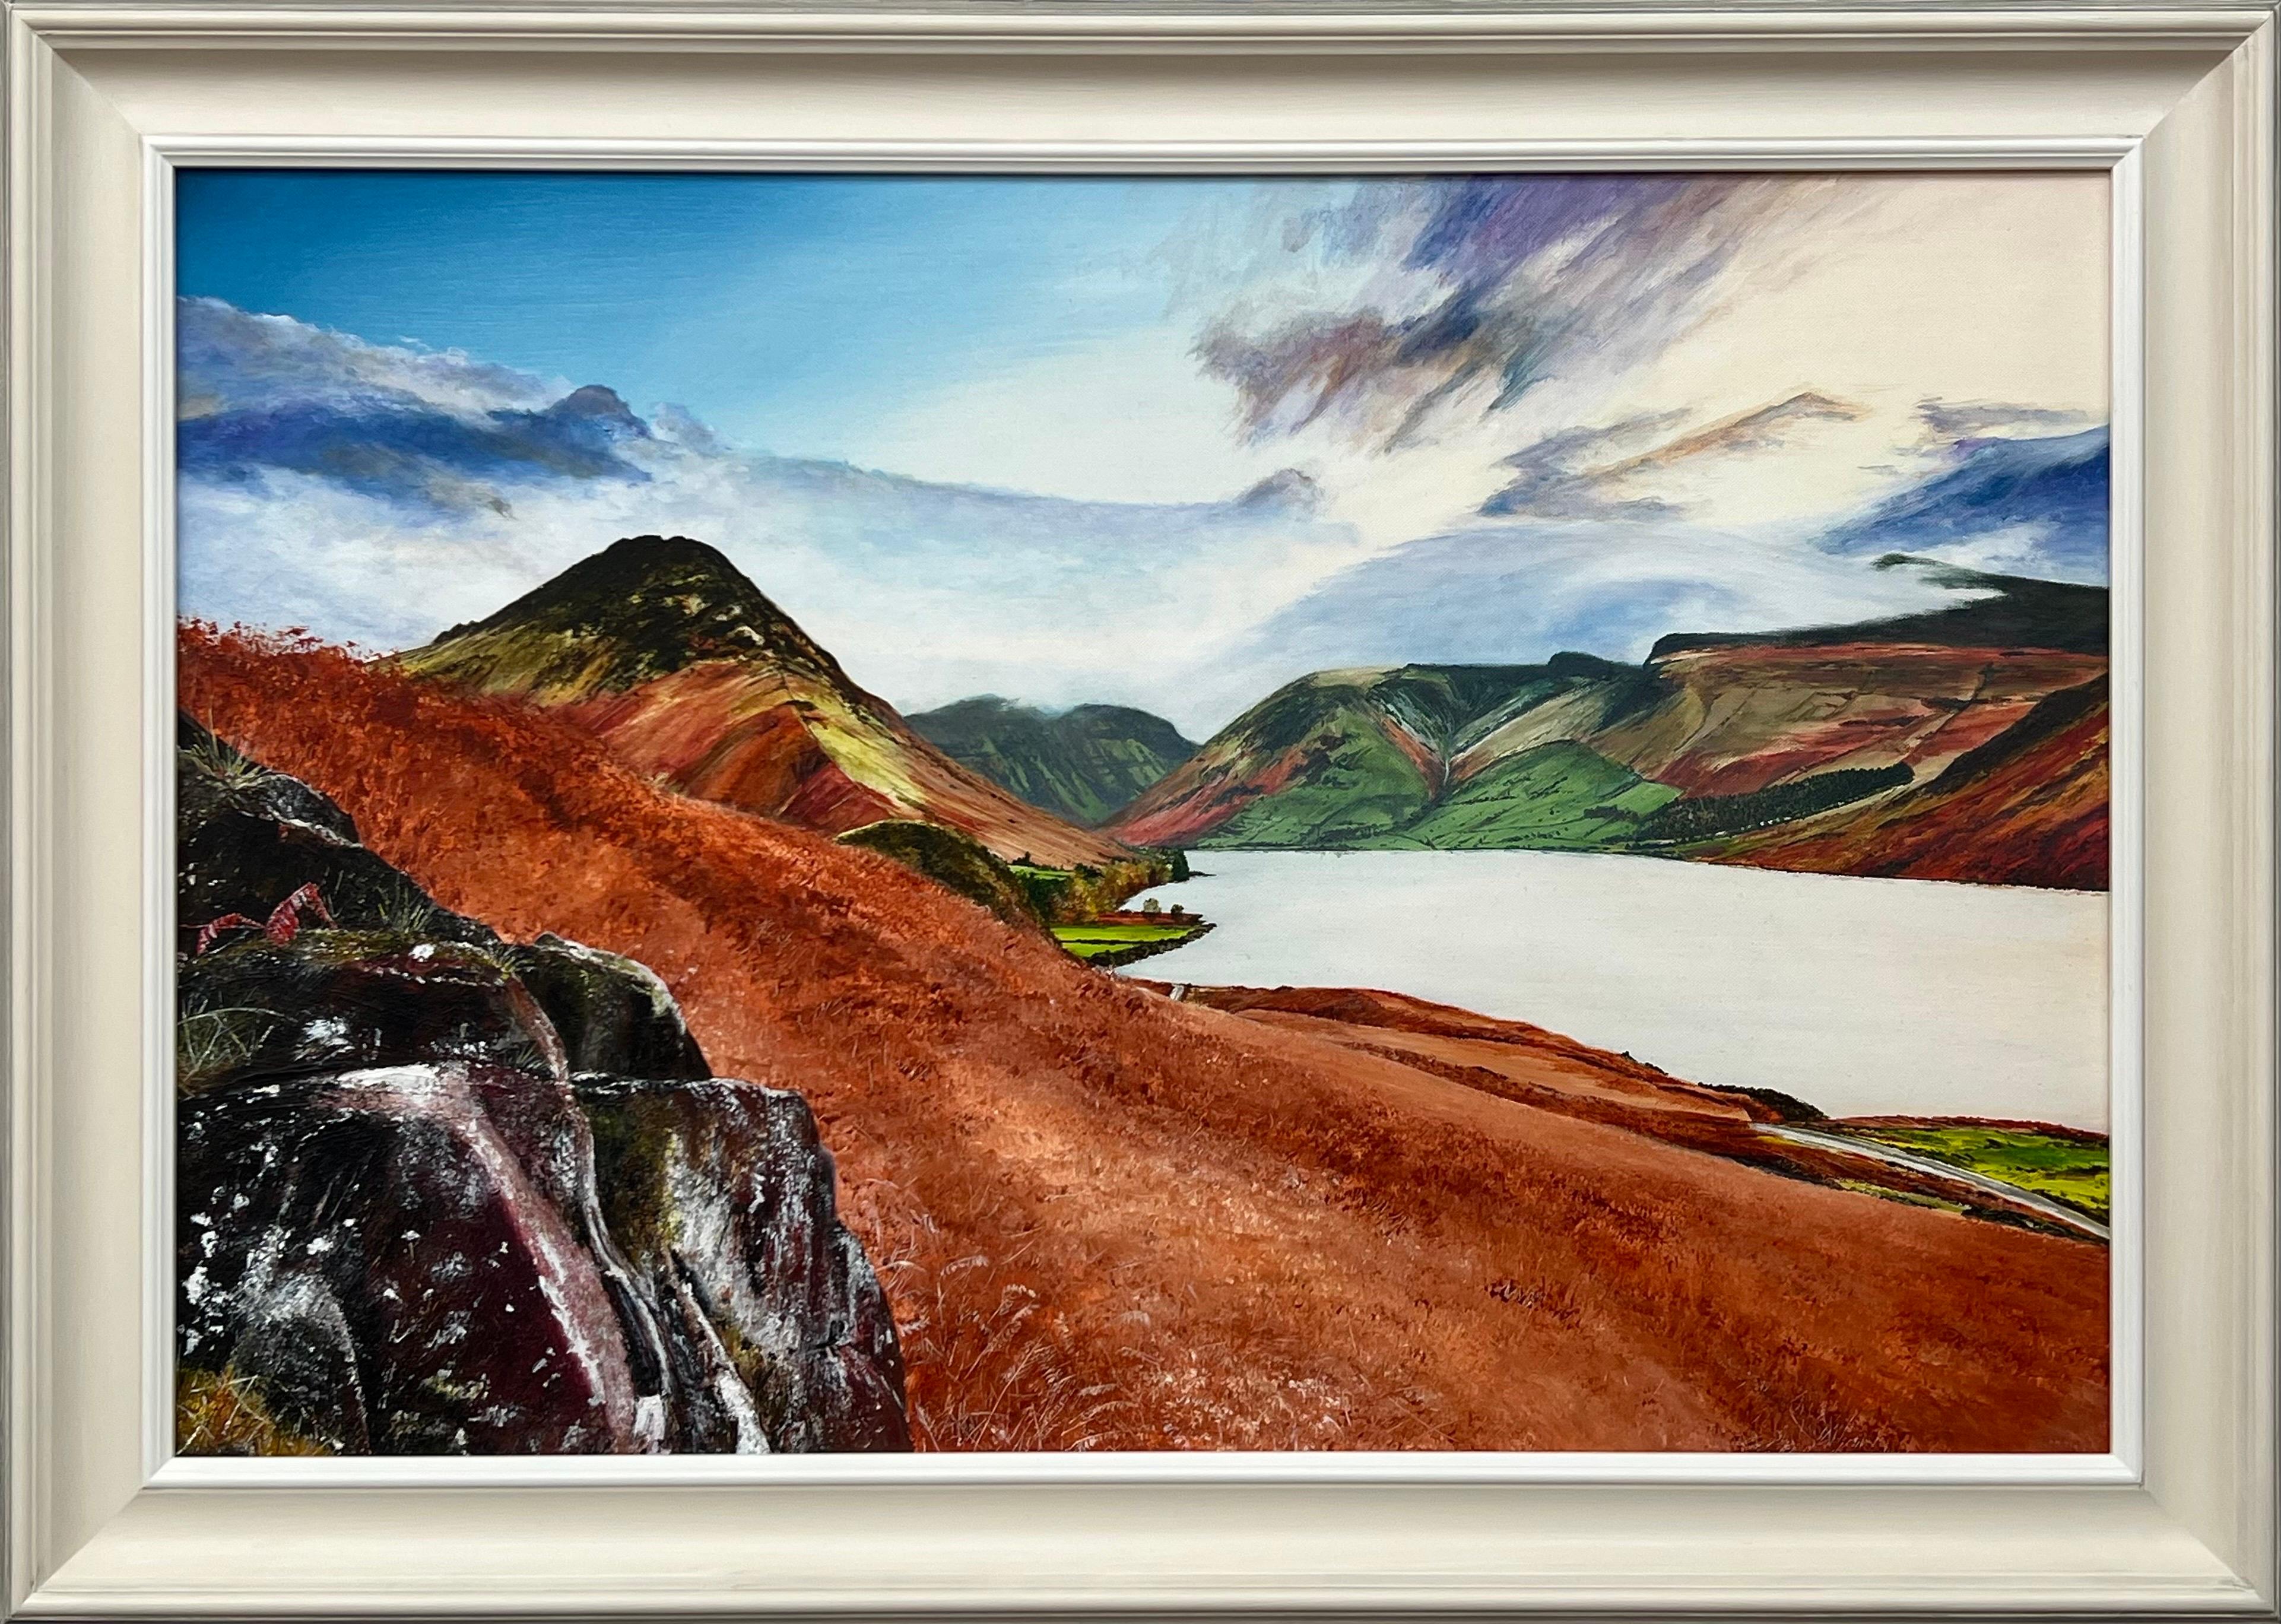 Rebecca Ann Wilmer Figurative Painting - Landscape Painting of Wastwater Lake District by British Contemporary Artist